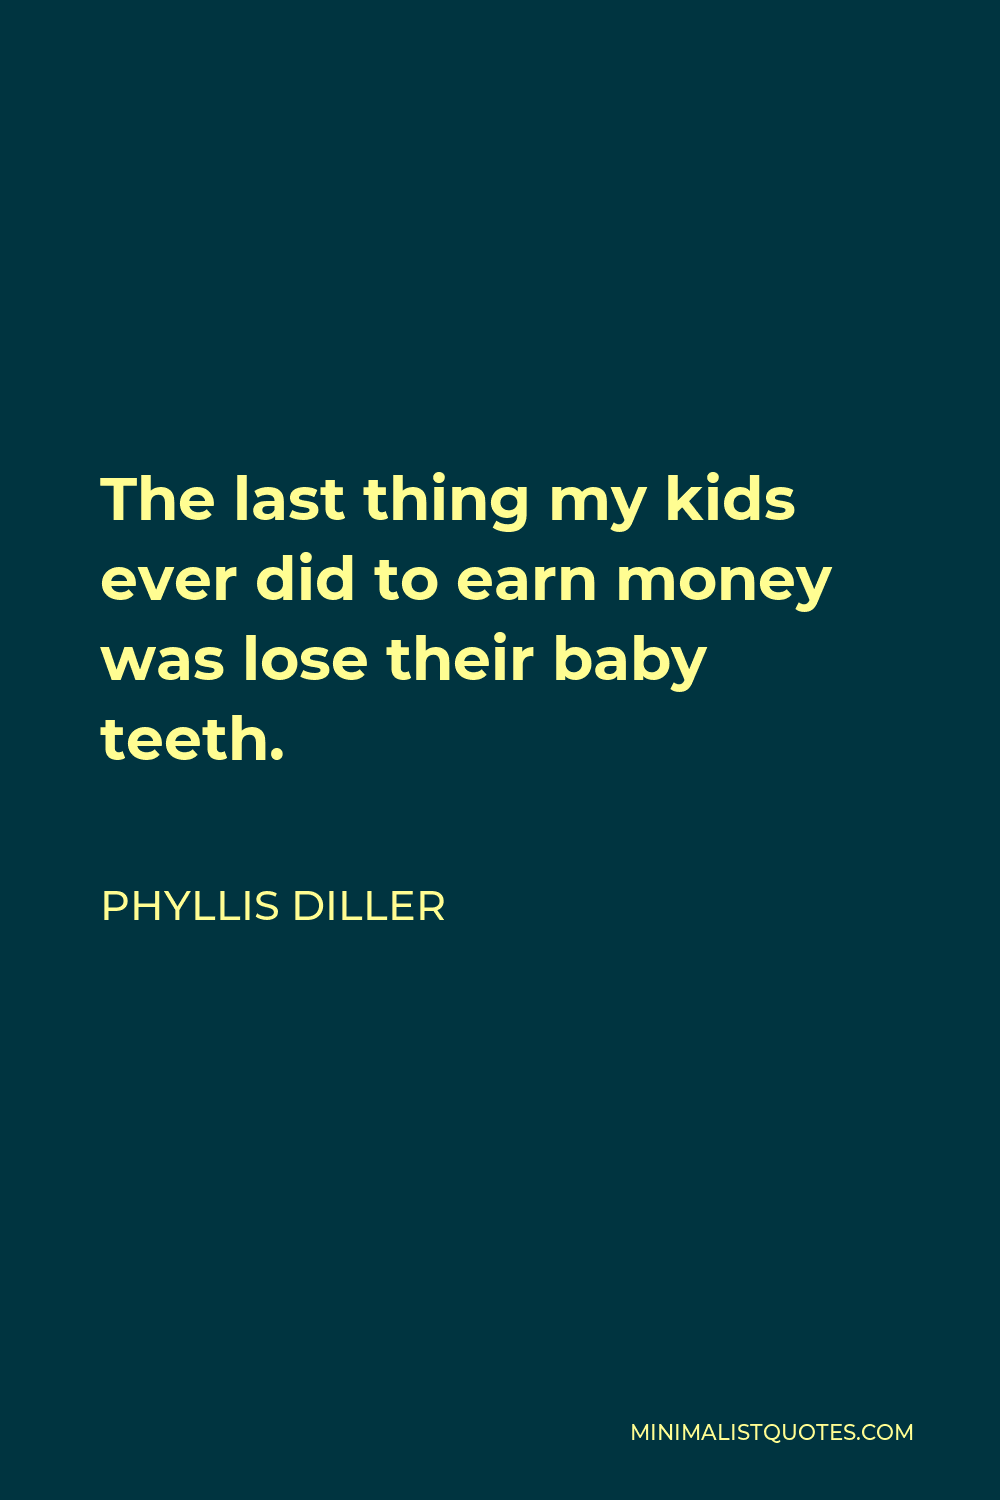 Phyllis Diller Quote - The last thing my kids ever did to earn money was lose their baby teeth.